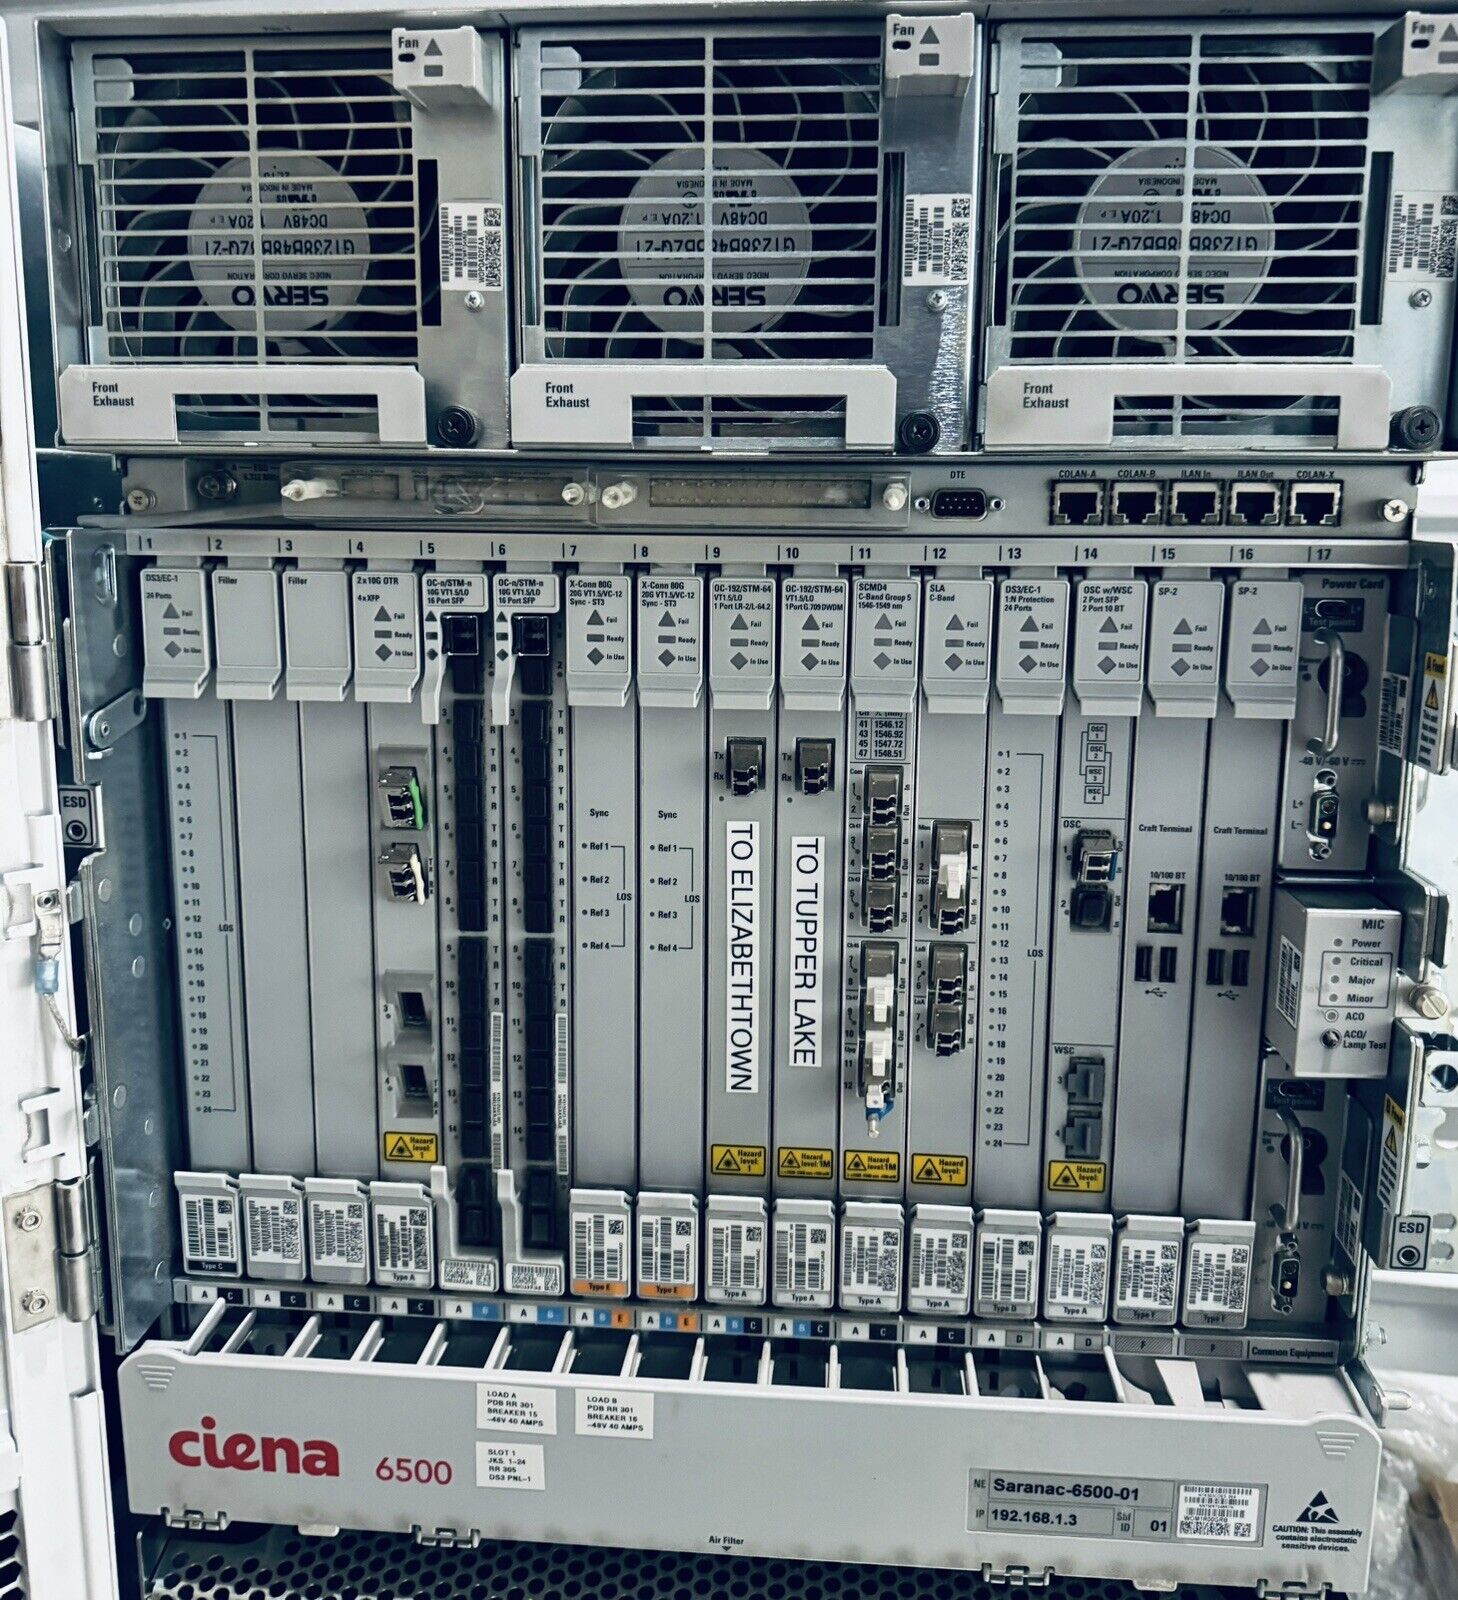 Ciena 6500 17-Slot Chassis OC-192 SP-2 SCMD4 OC-N - LOADED WITH CARDS